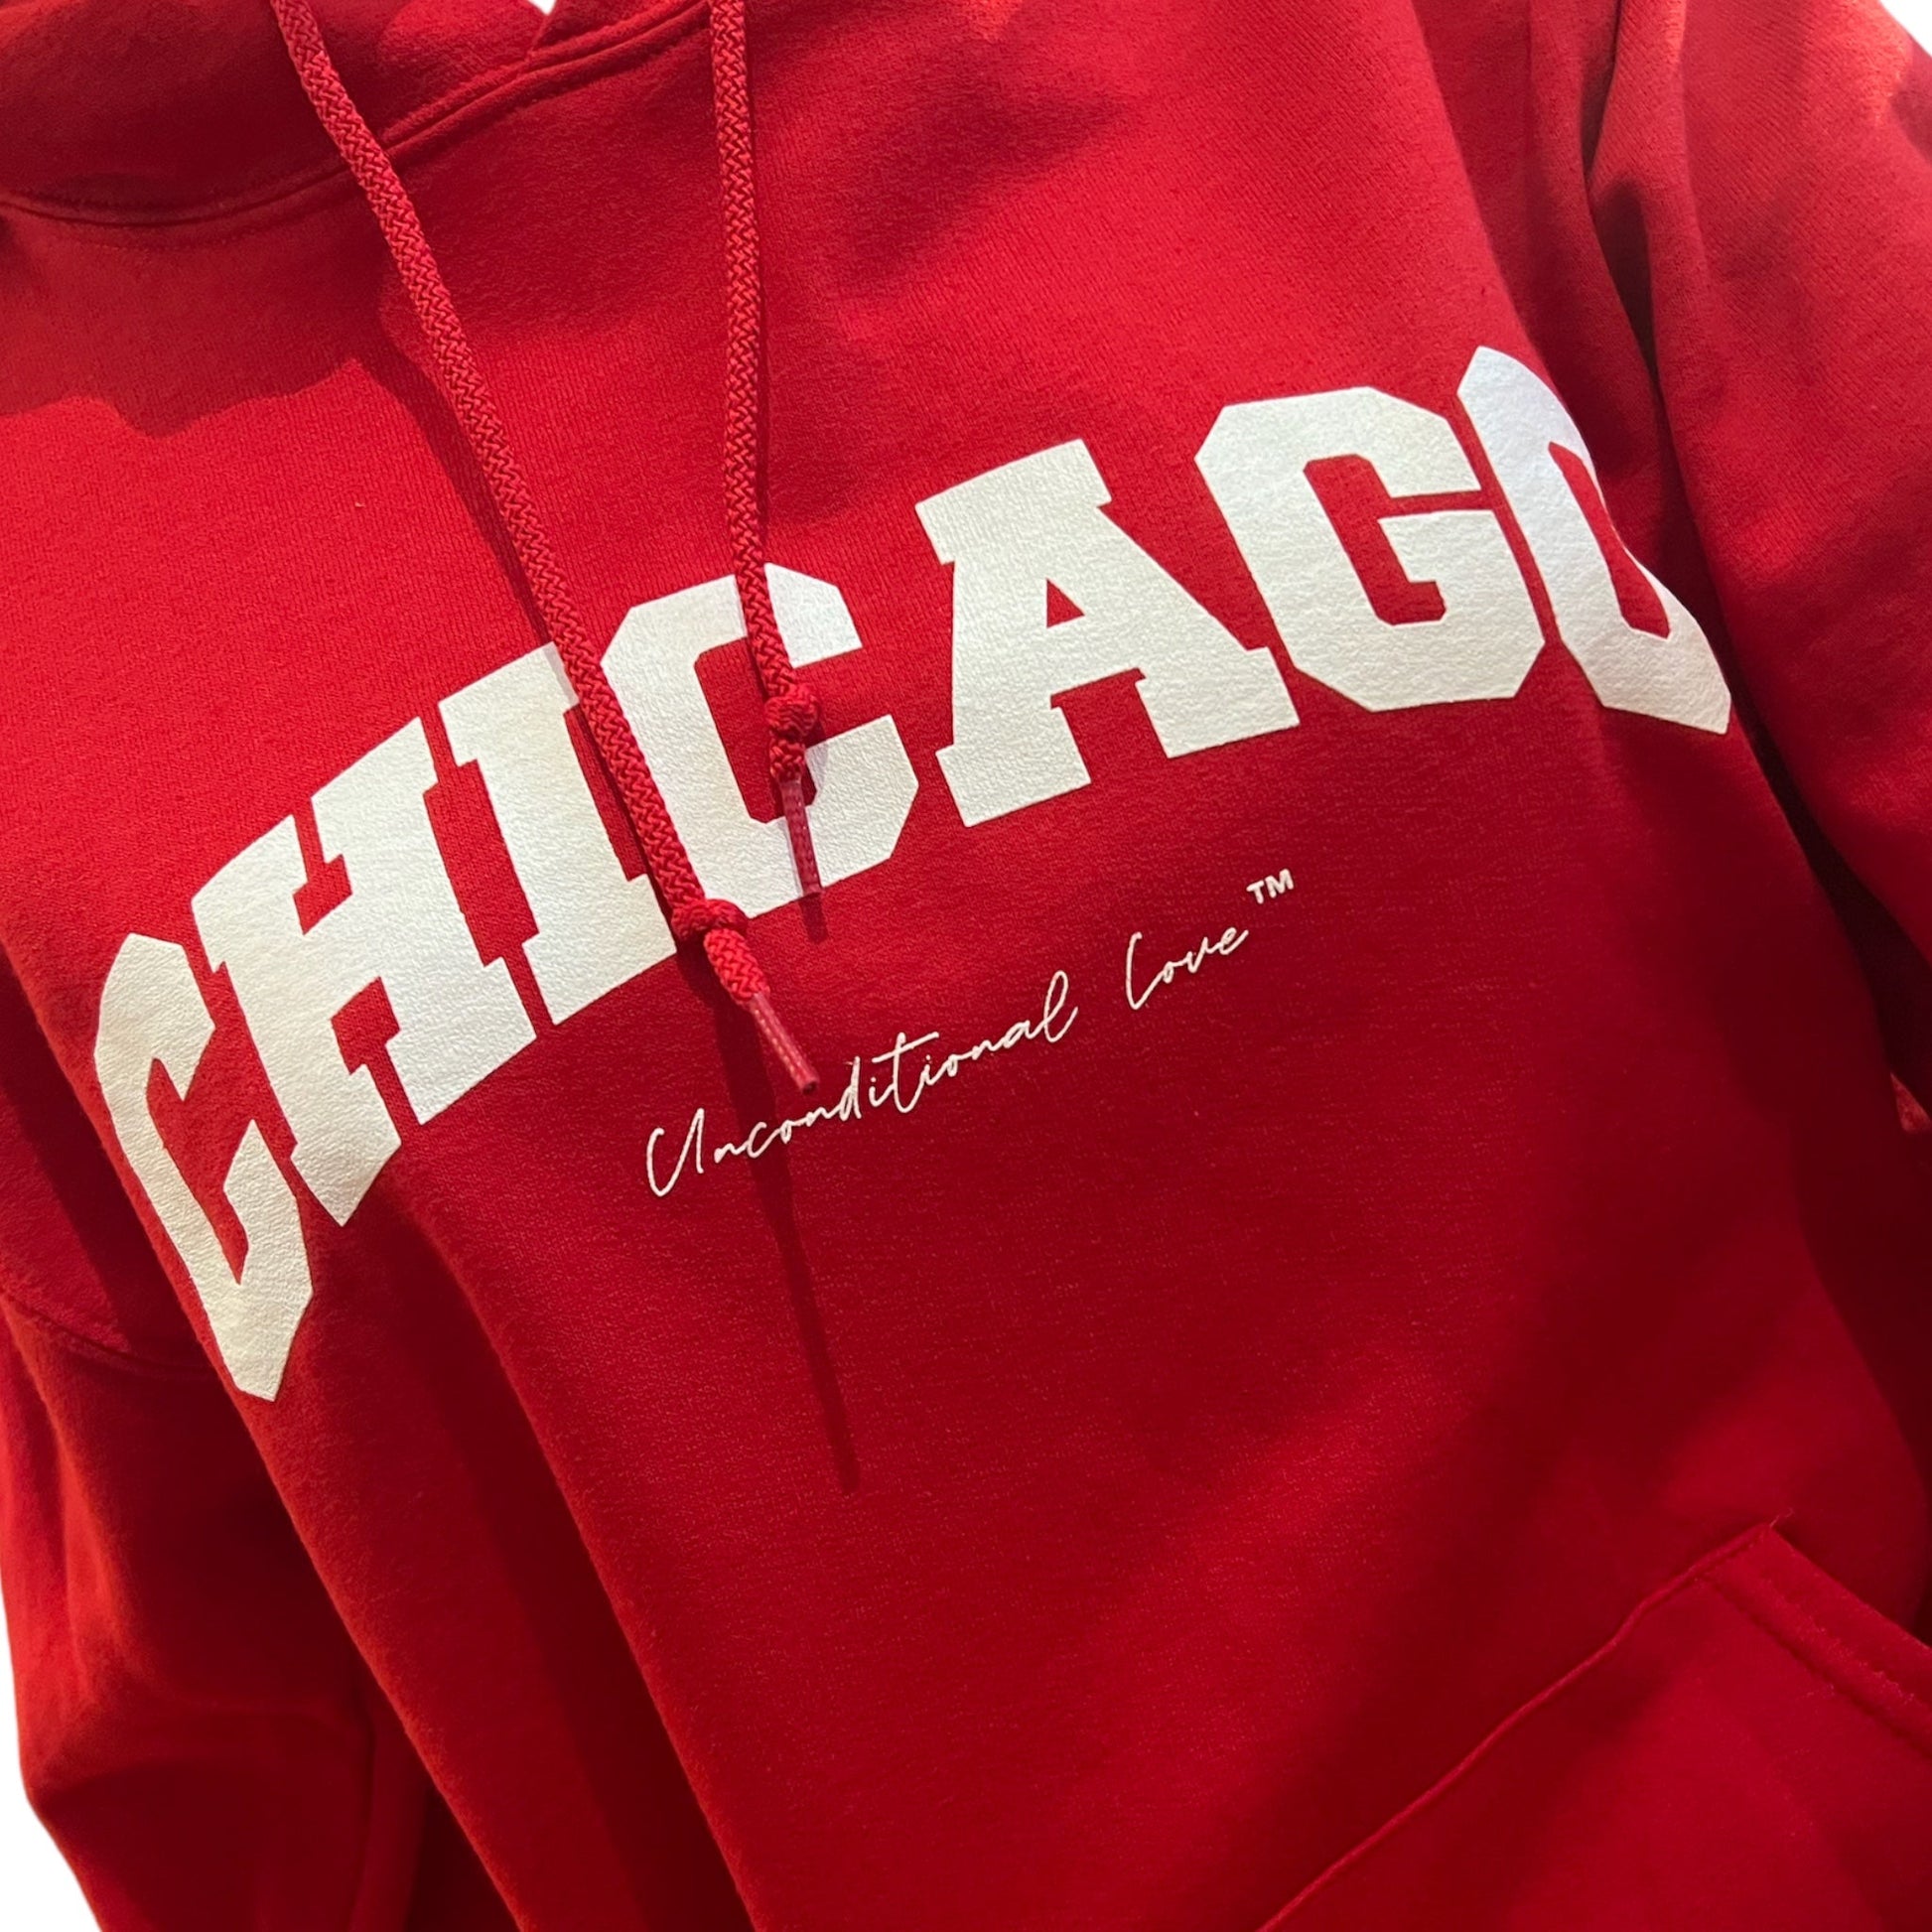 CHICAGO Hoodie - Something about Sofia